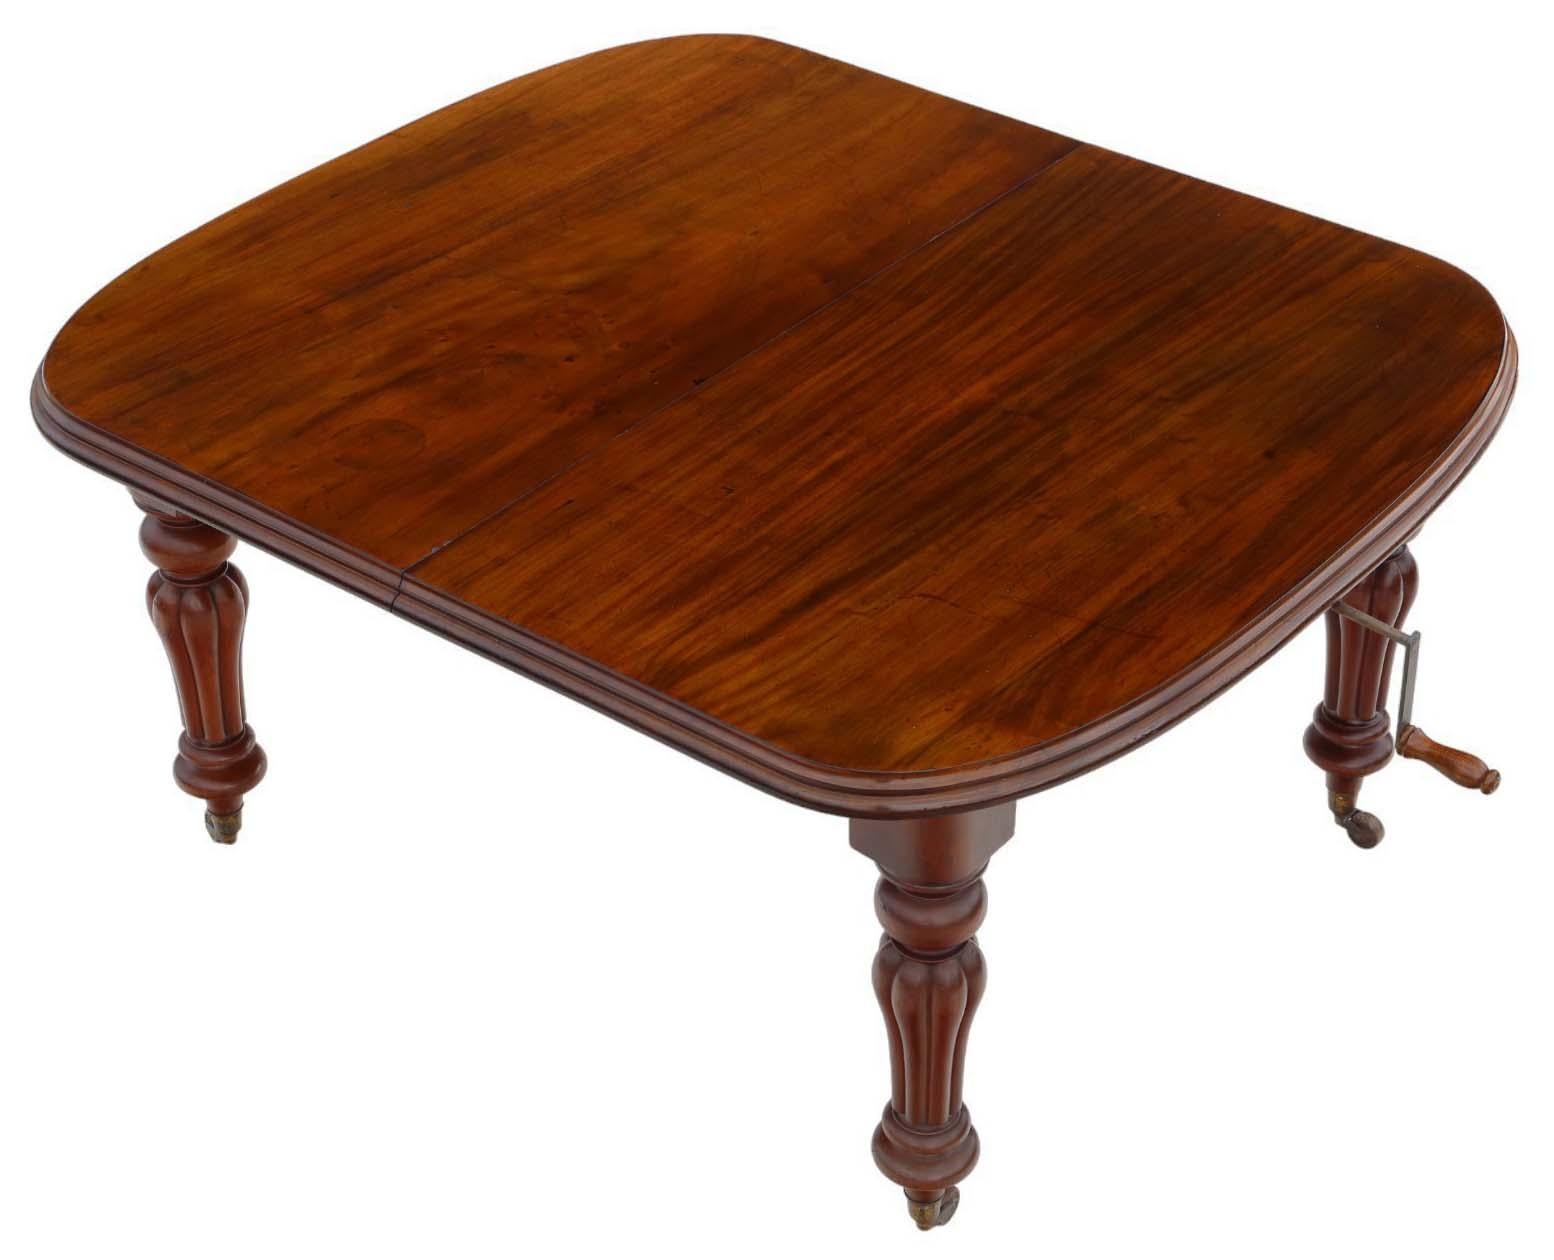 Antique Mid-19th Century Mahogany Extending Dining Table - Large, Fine Quality For Sale 3